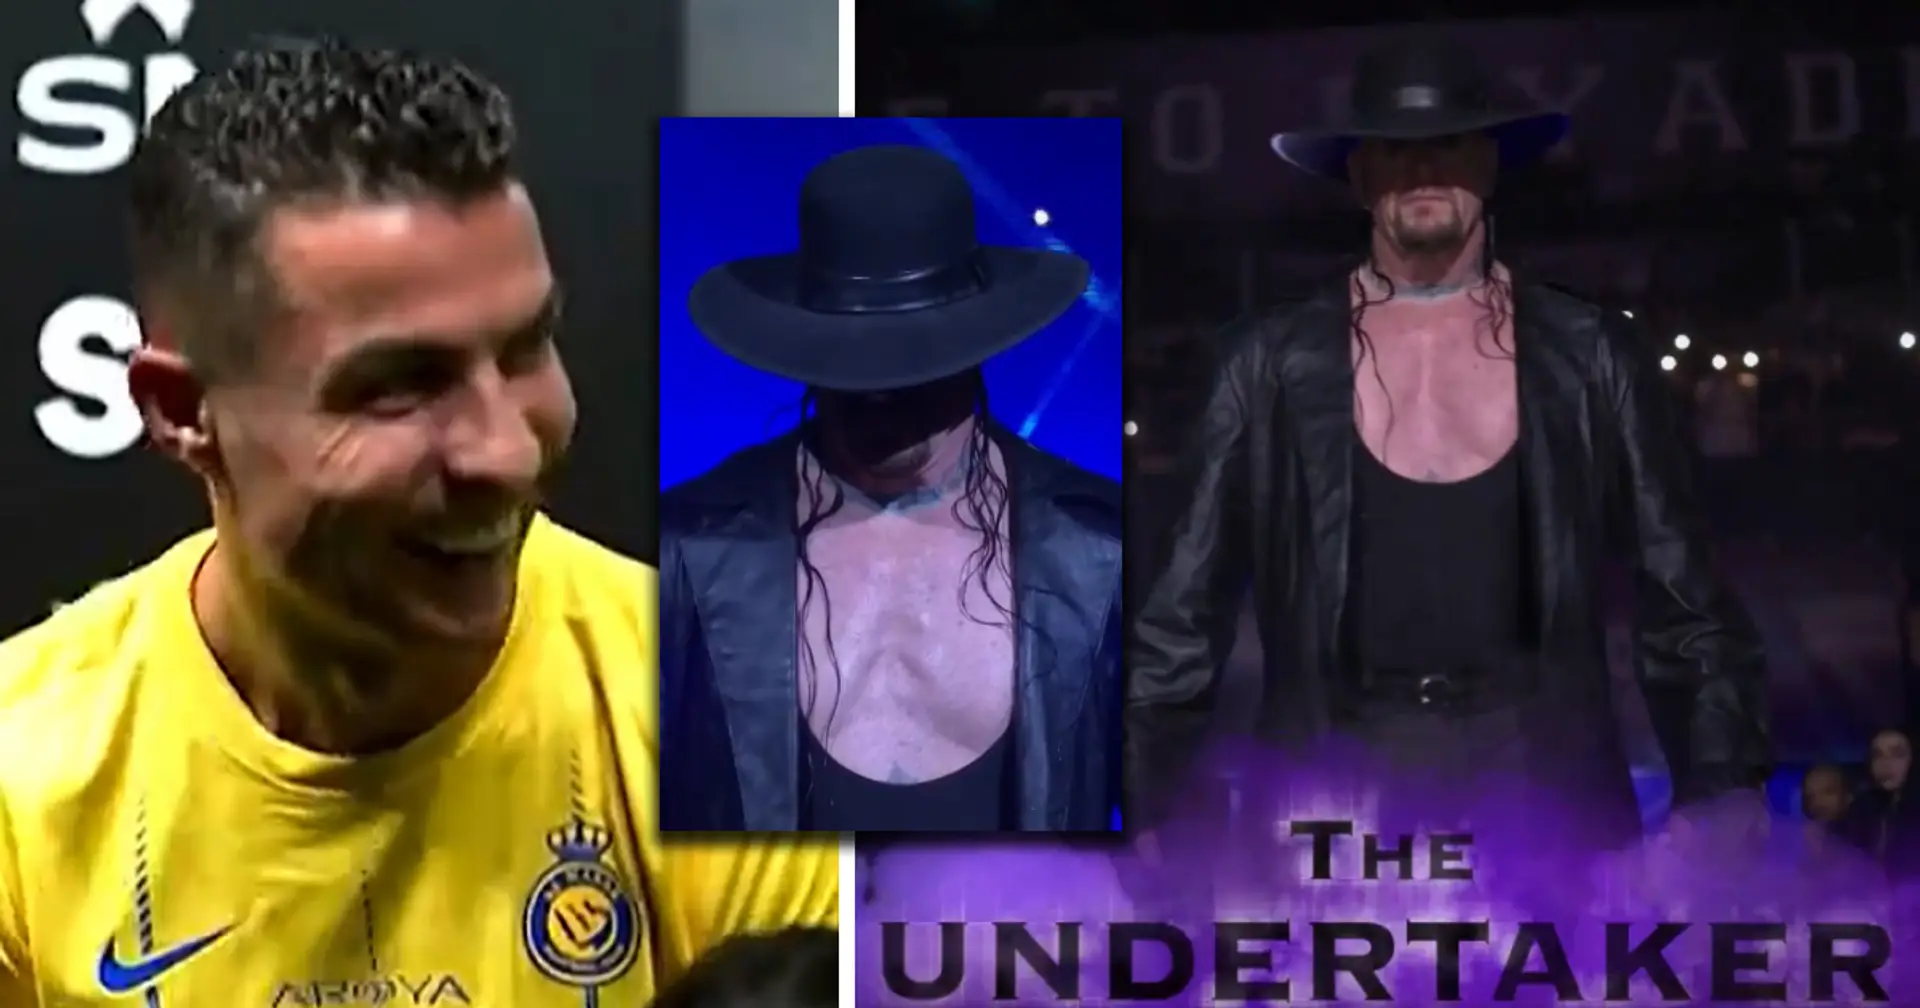 The Undertaker makes shock appearance before Al Nassr match, Ronaldo reaction spotted 